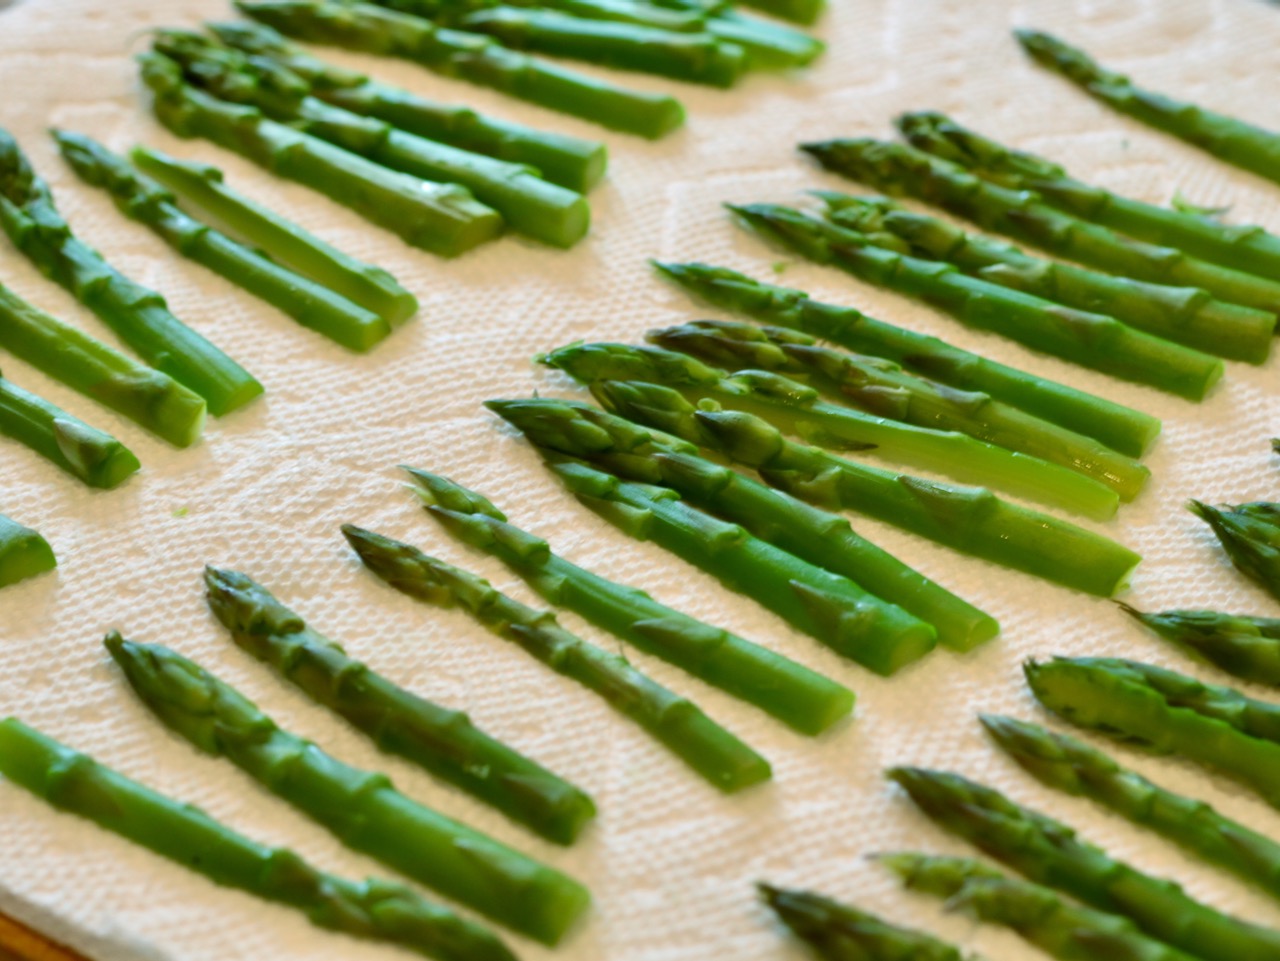 Drying asparagus on paper towel